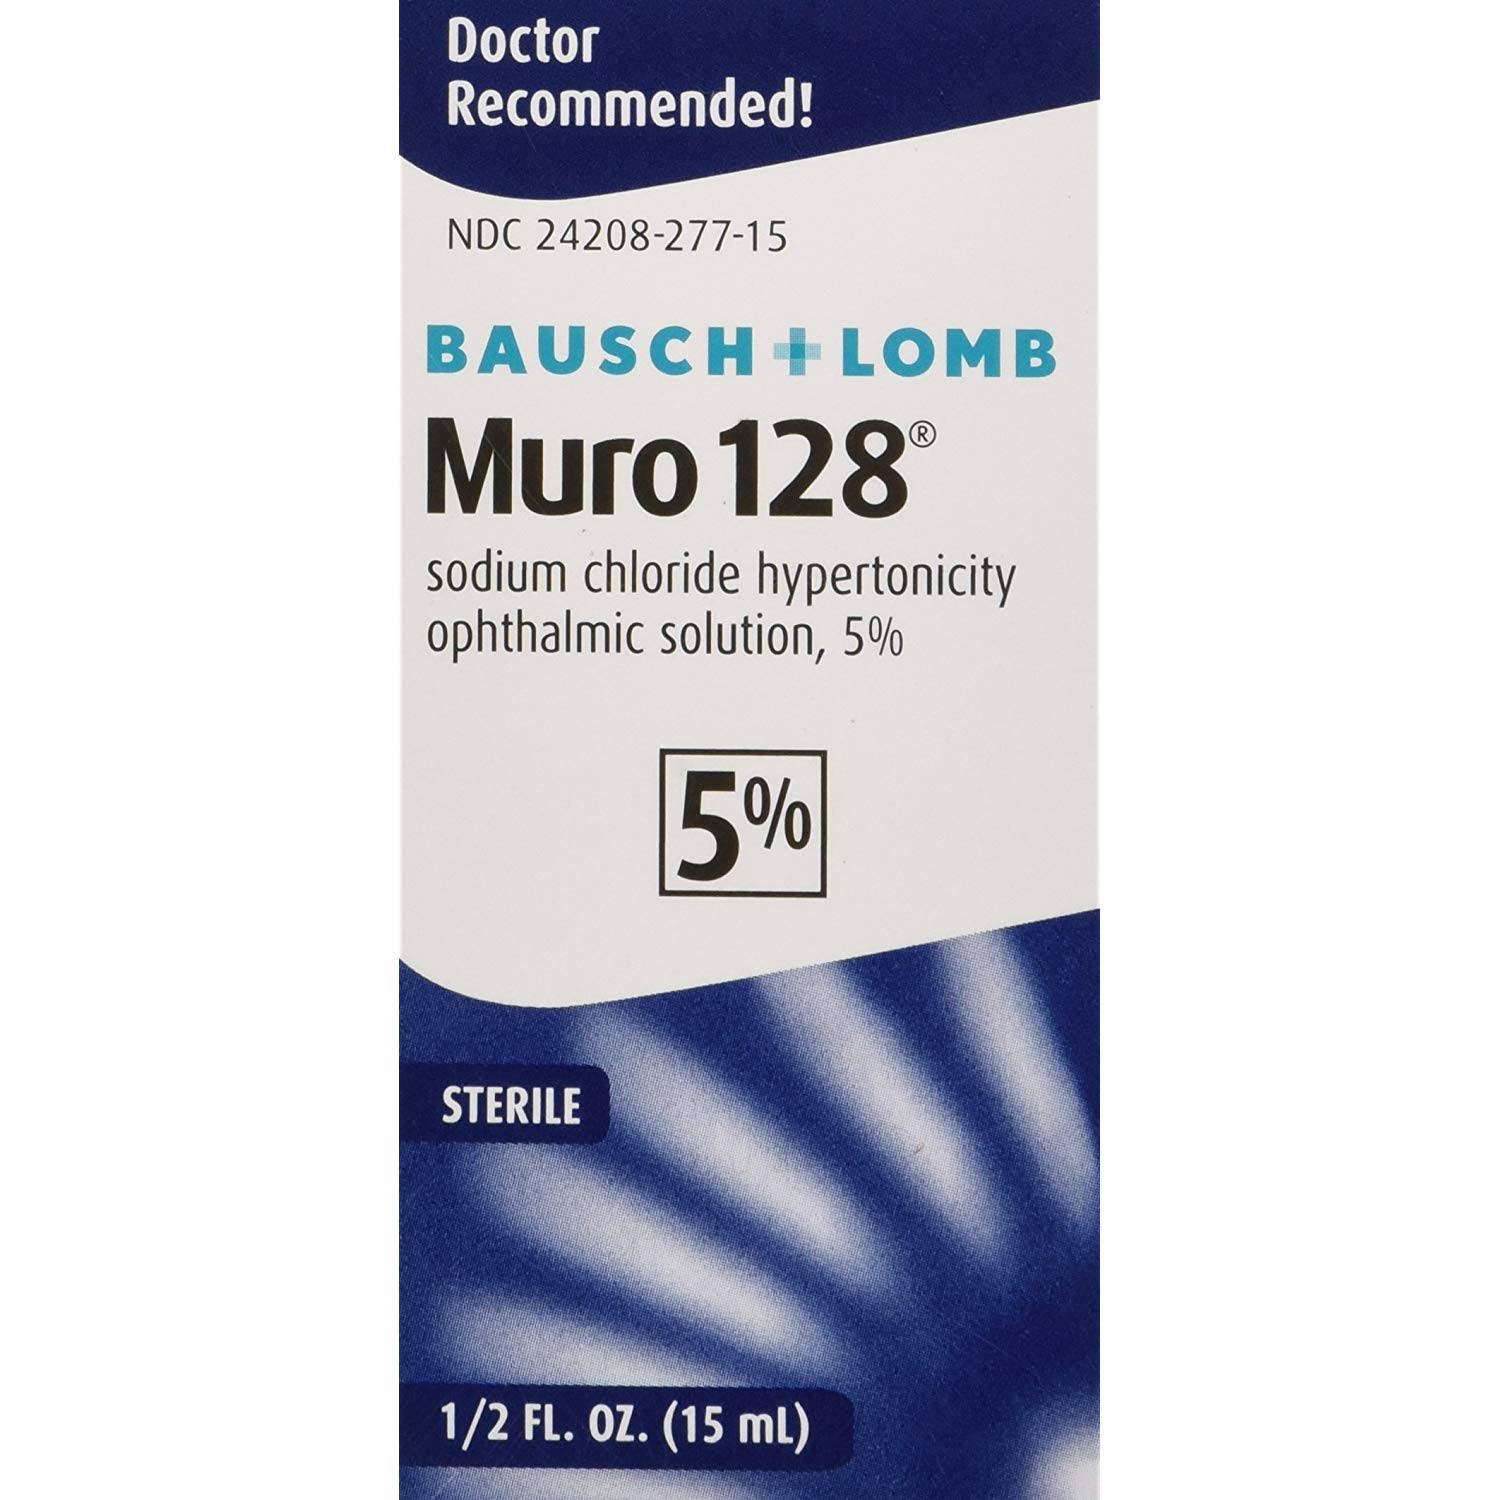 Bausch & Lomb Muro 128 Ophthalmic Solution - 0.5 oz